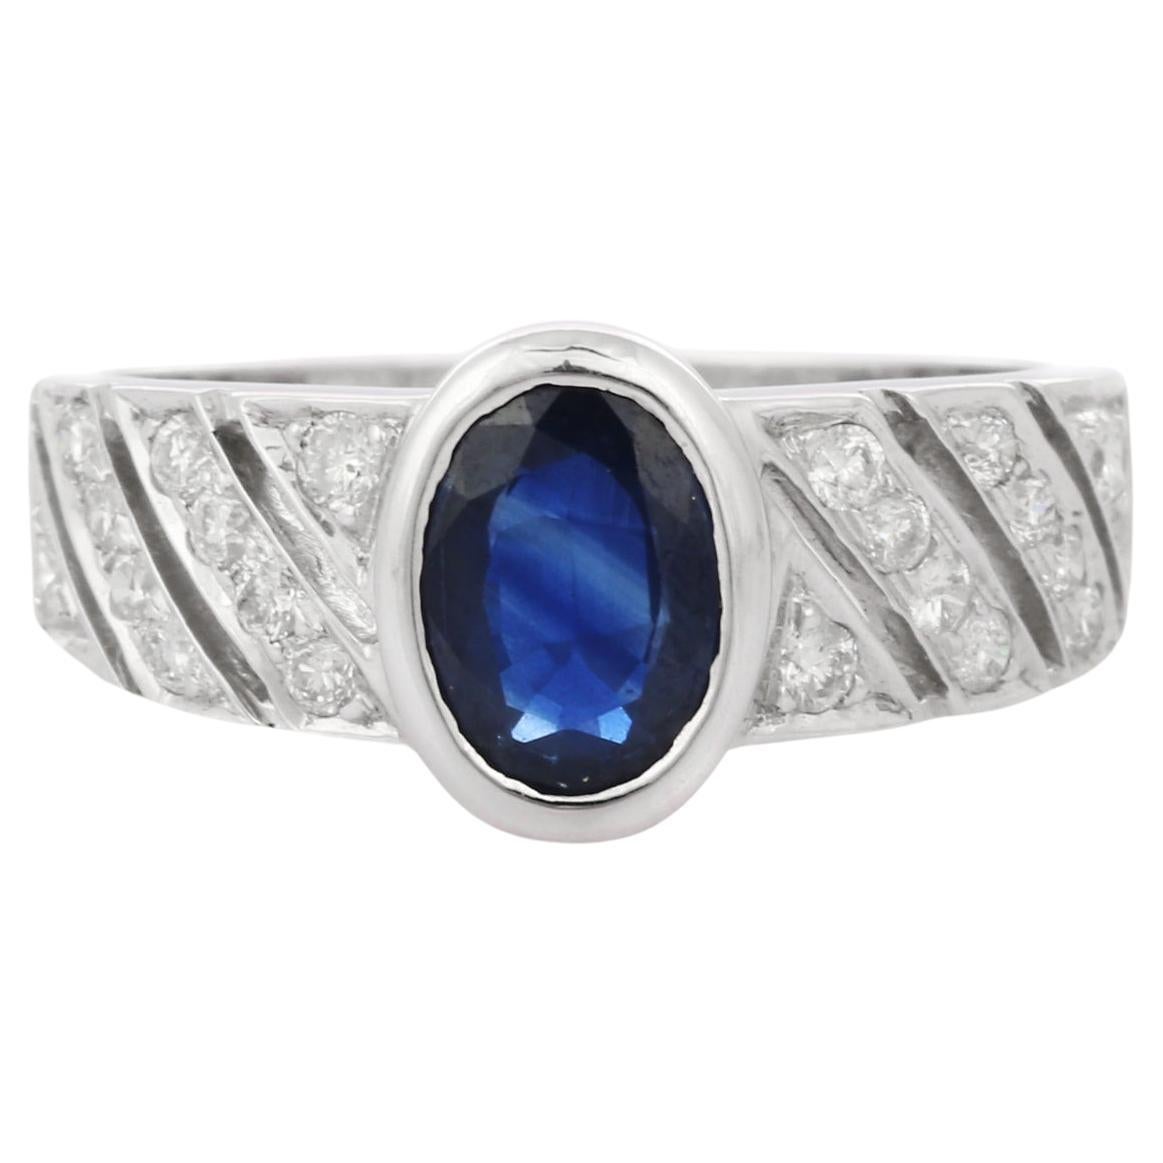 Exquisite Deep Blue Sapphire Diamond Unisex Engagement Ring in 18k White Gold